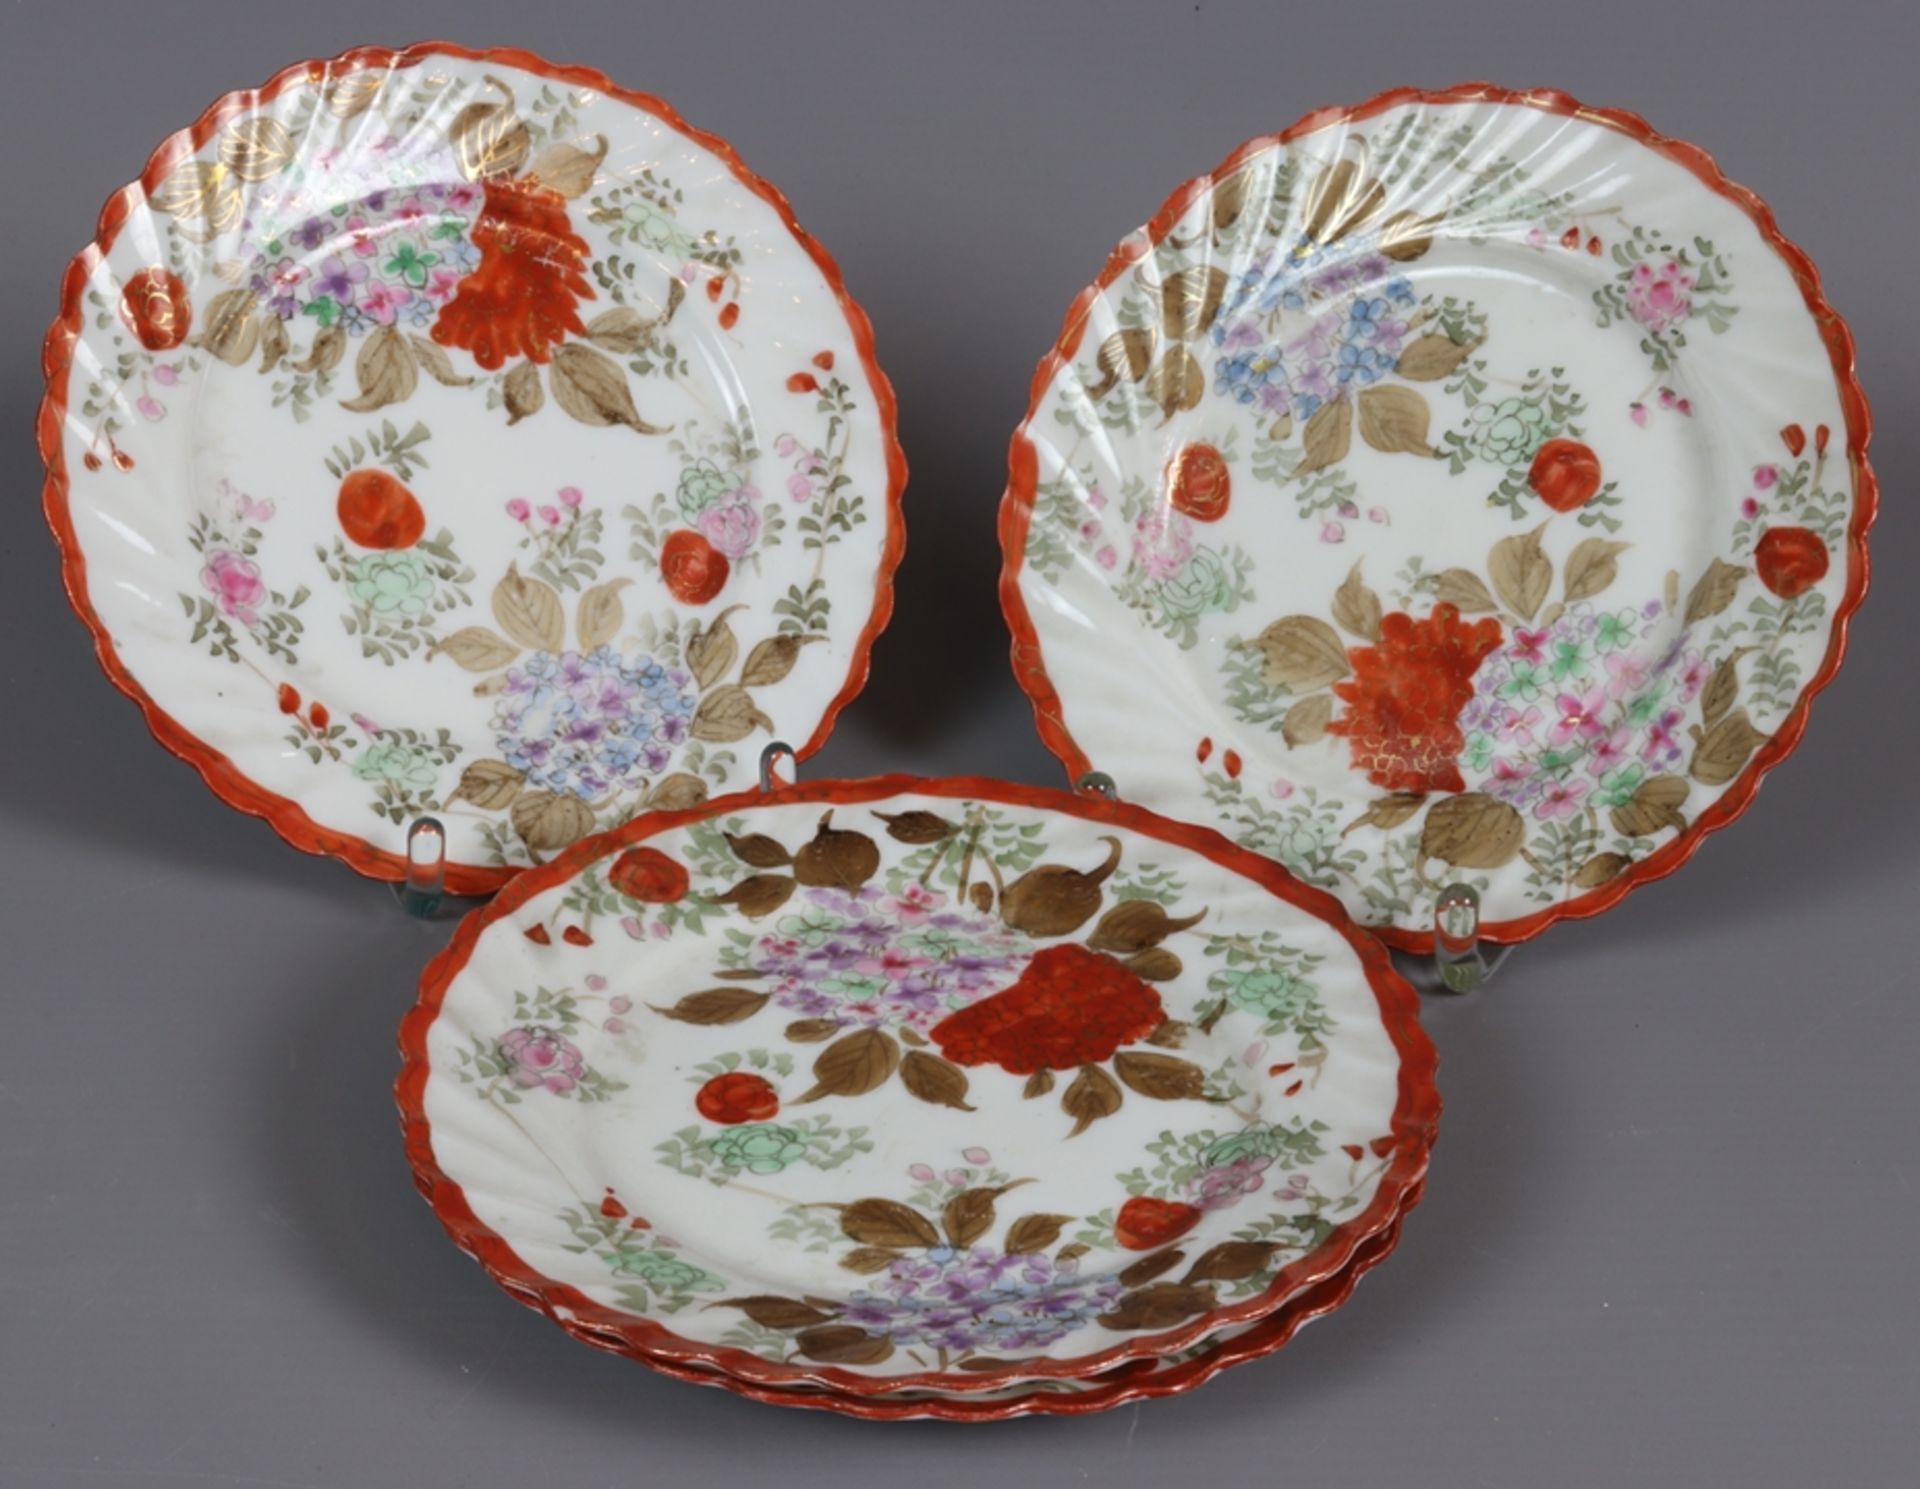 Lot of Asian porcelain, first half of the 20th century, China - Image 4 of 9